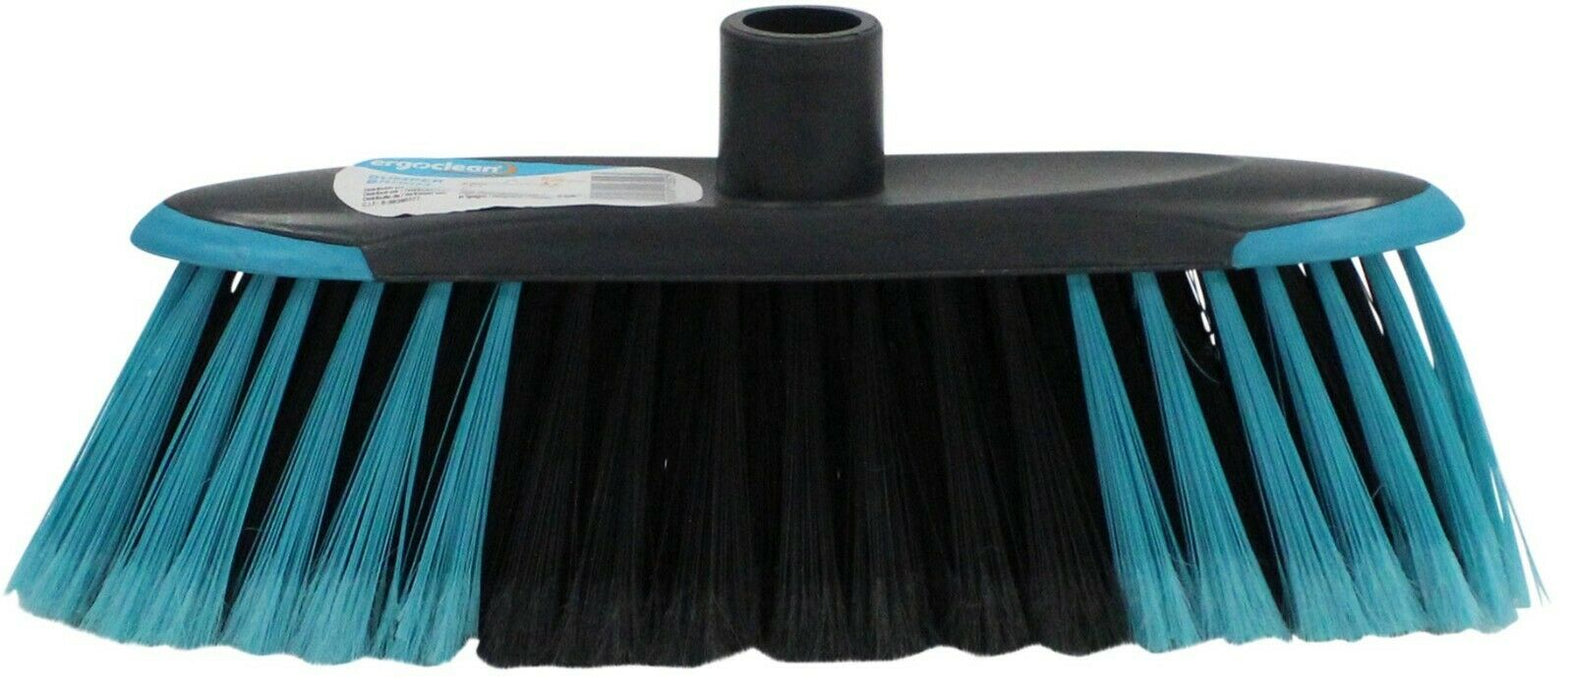 Broom Head 30cm Medium For Indoors Use Or Light Garden Use With Bumper